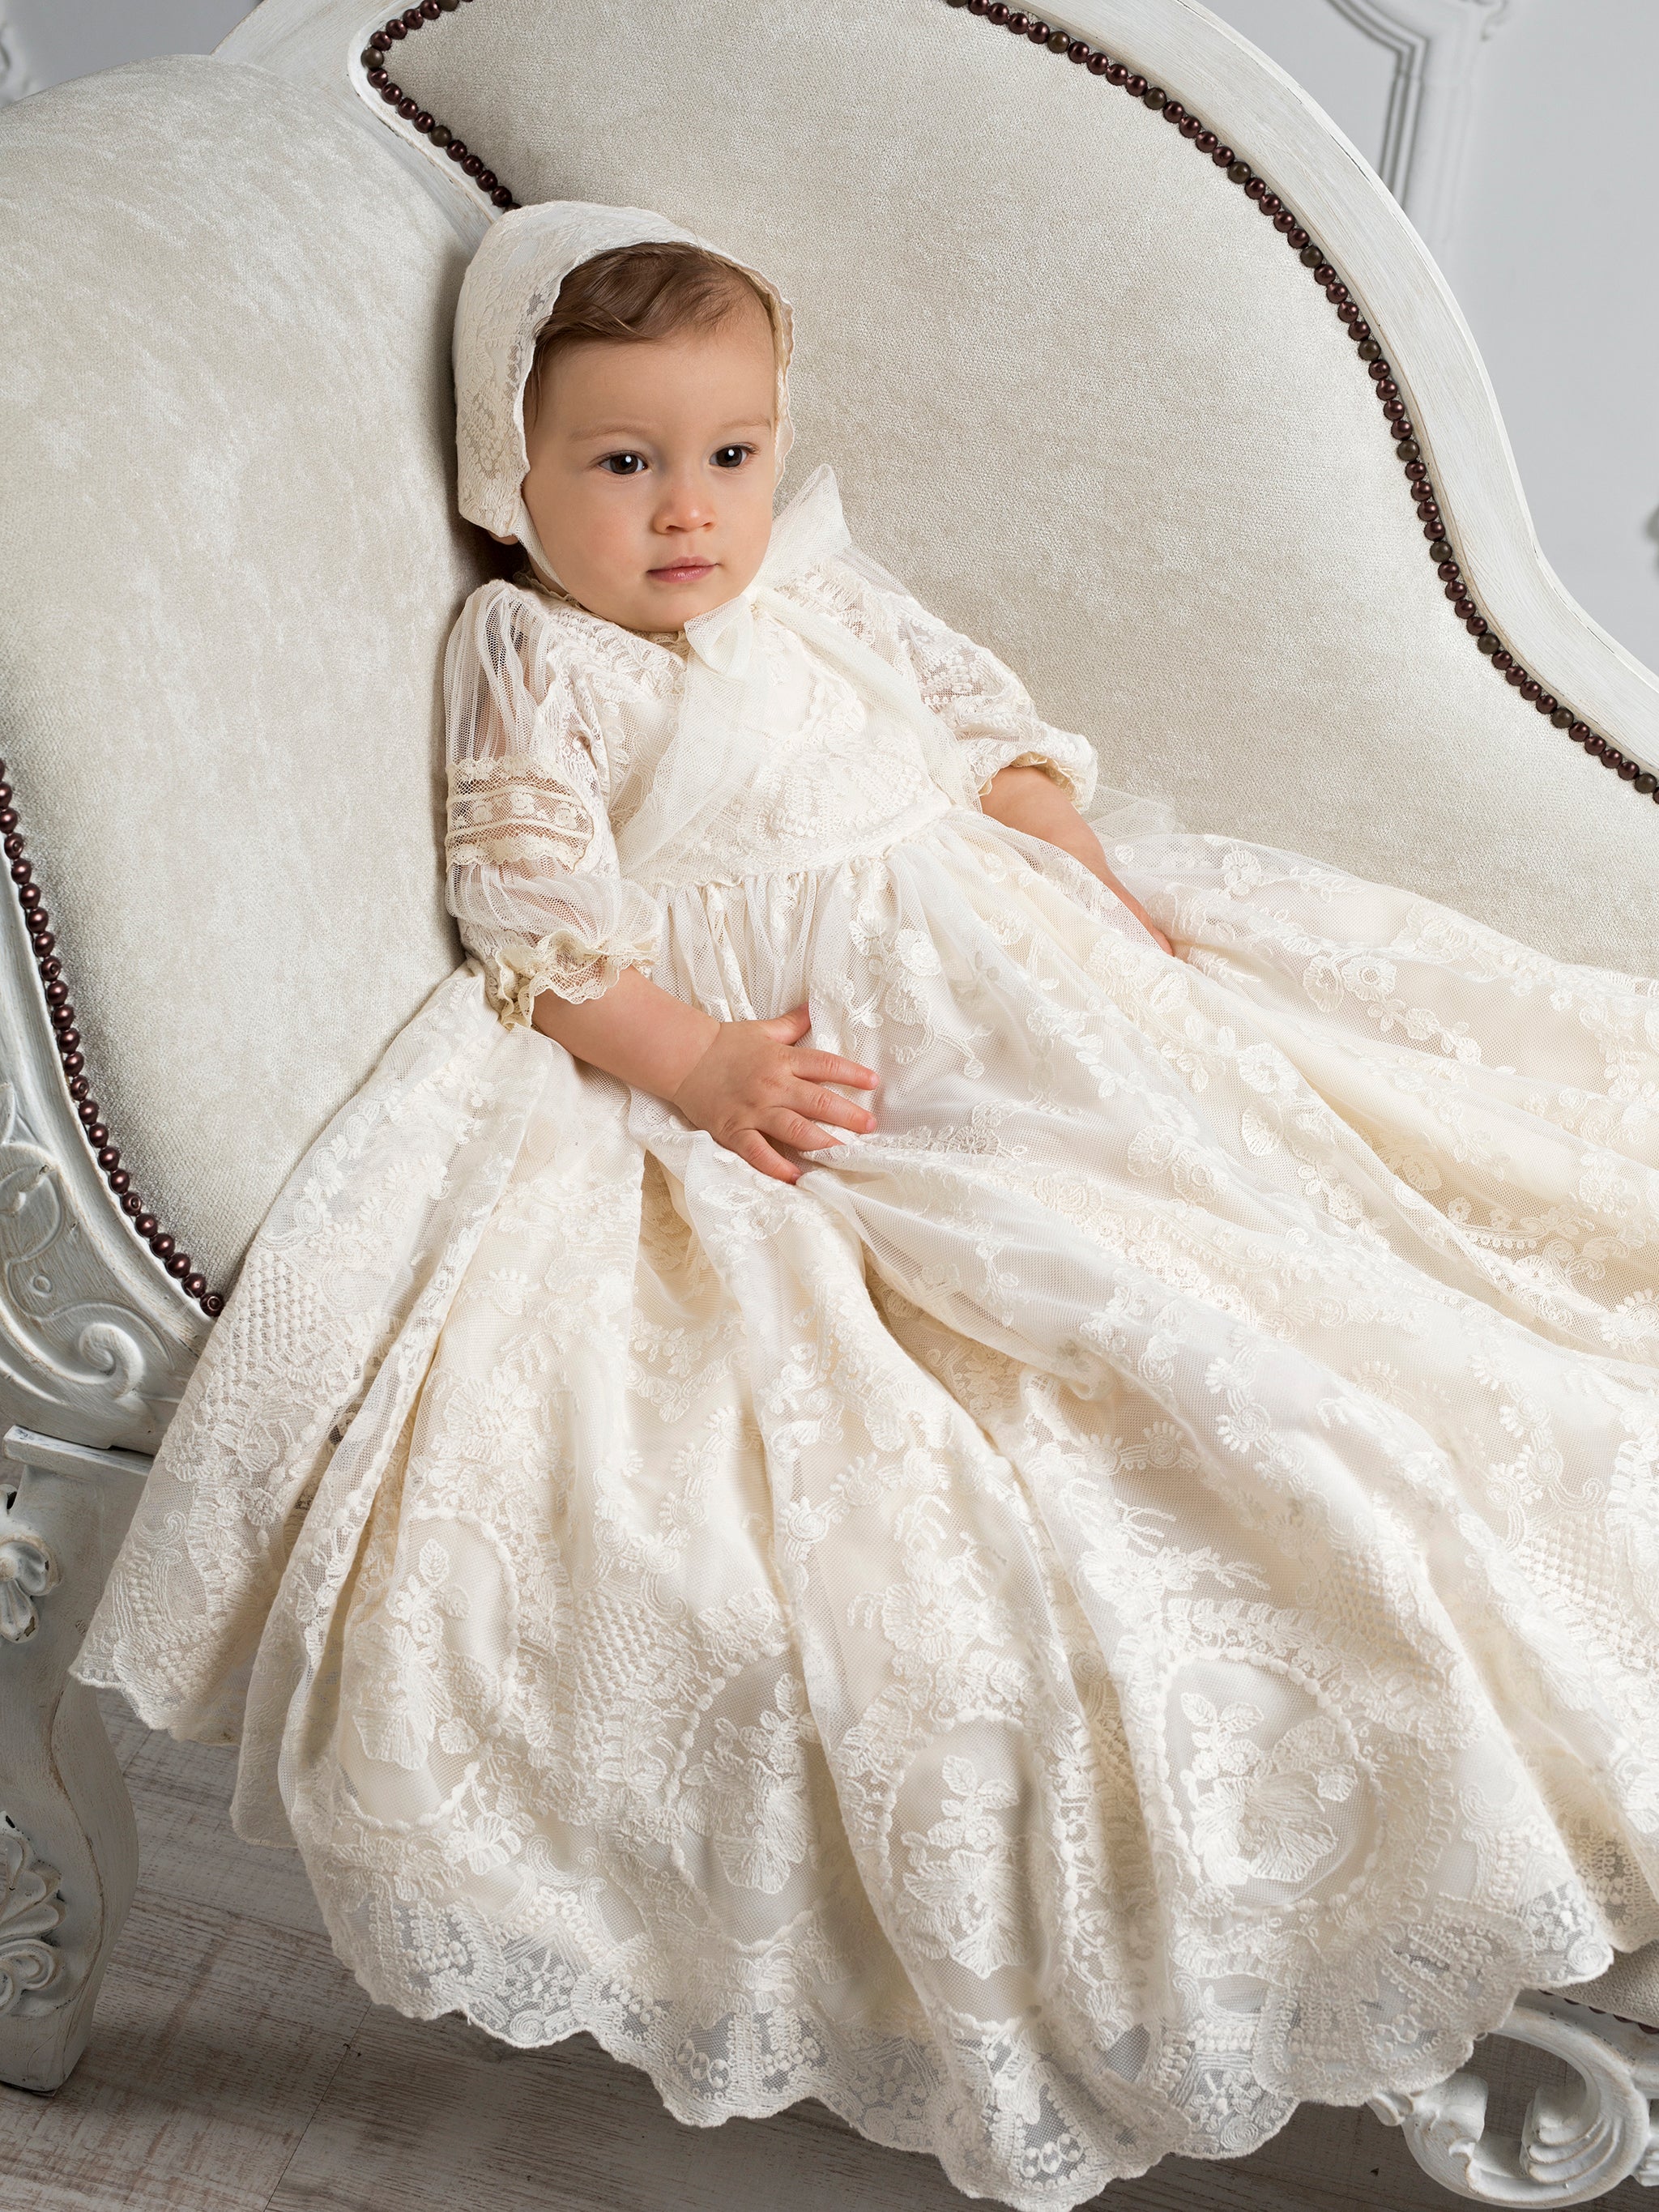 The Queen's Dressmaker Reveals How Royal Christening Gown Was Made